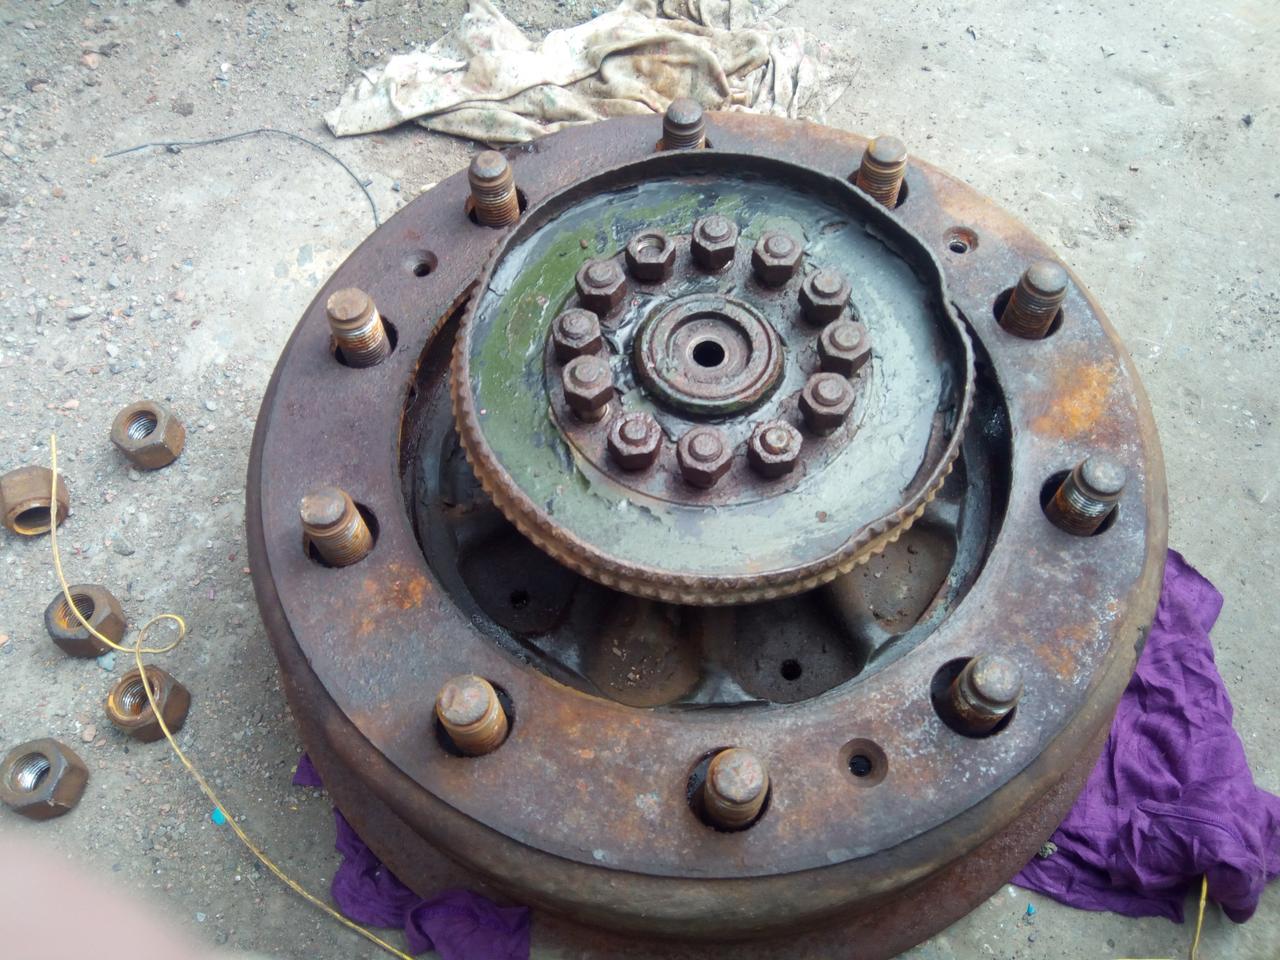 A brake drum and wheel hub laying on rags in a dusty yard. The
drum has just about separated from the wheel hub.